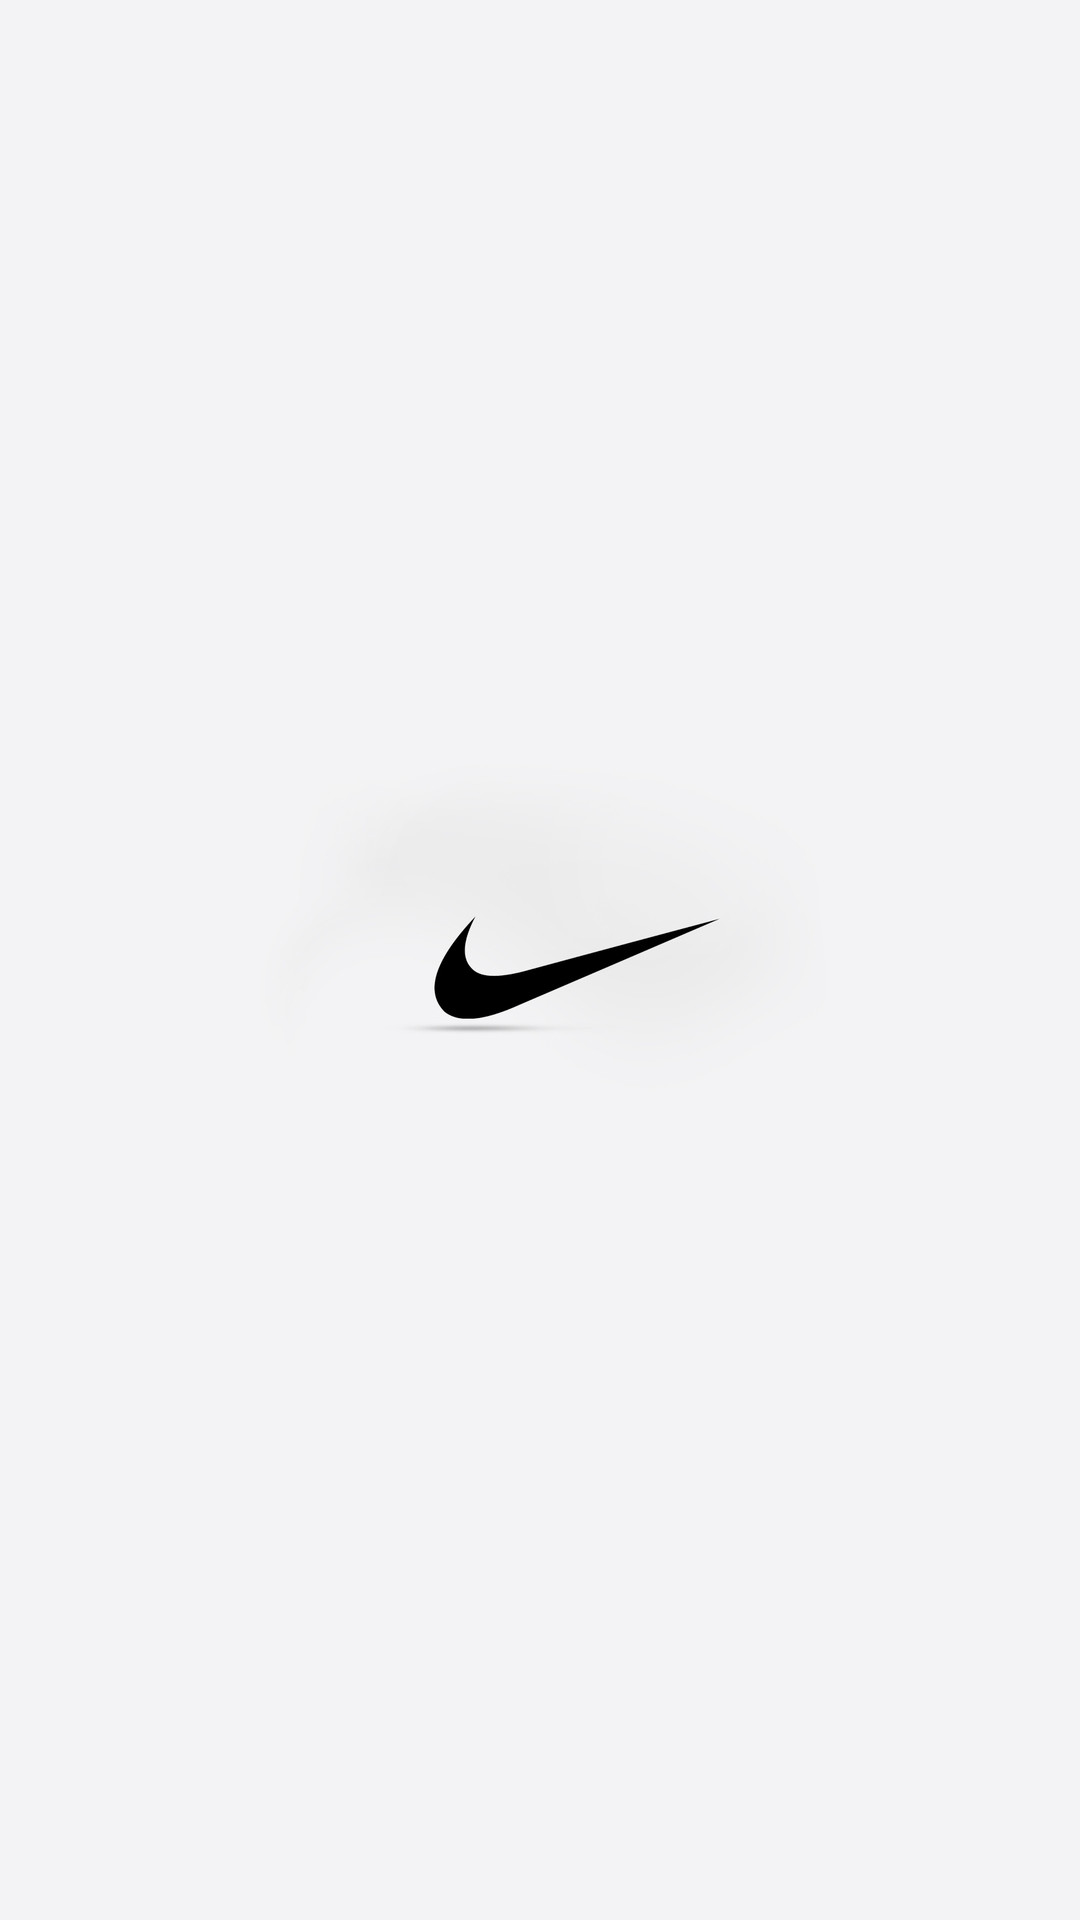 1080x1920 Nike htc one wallpaper - Best htc one wallpapers